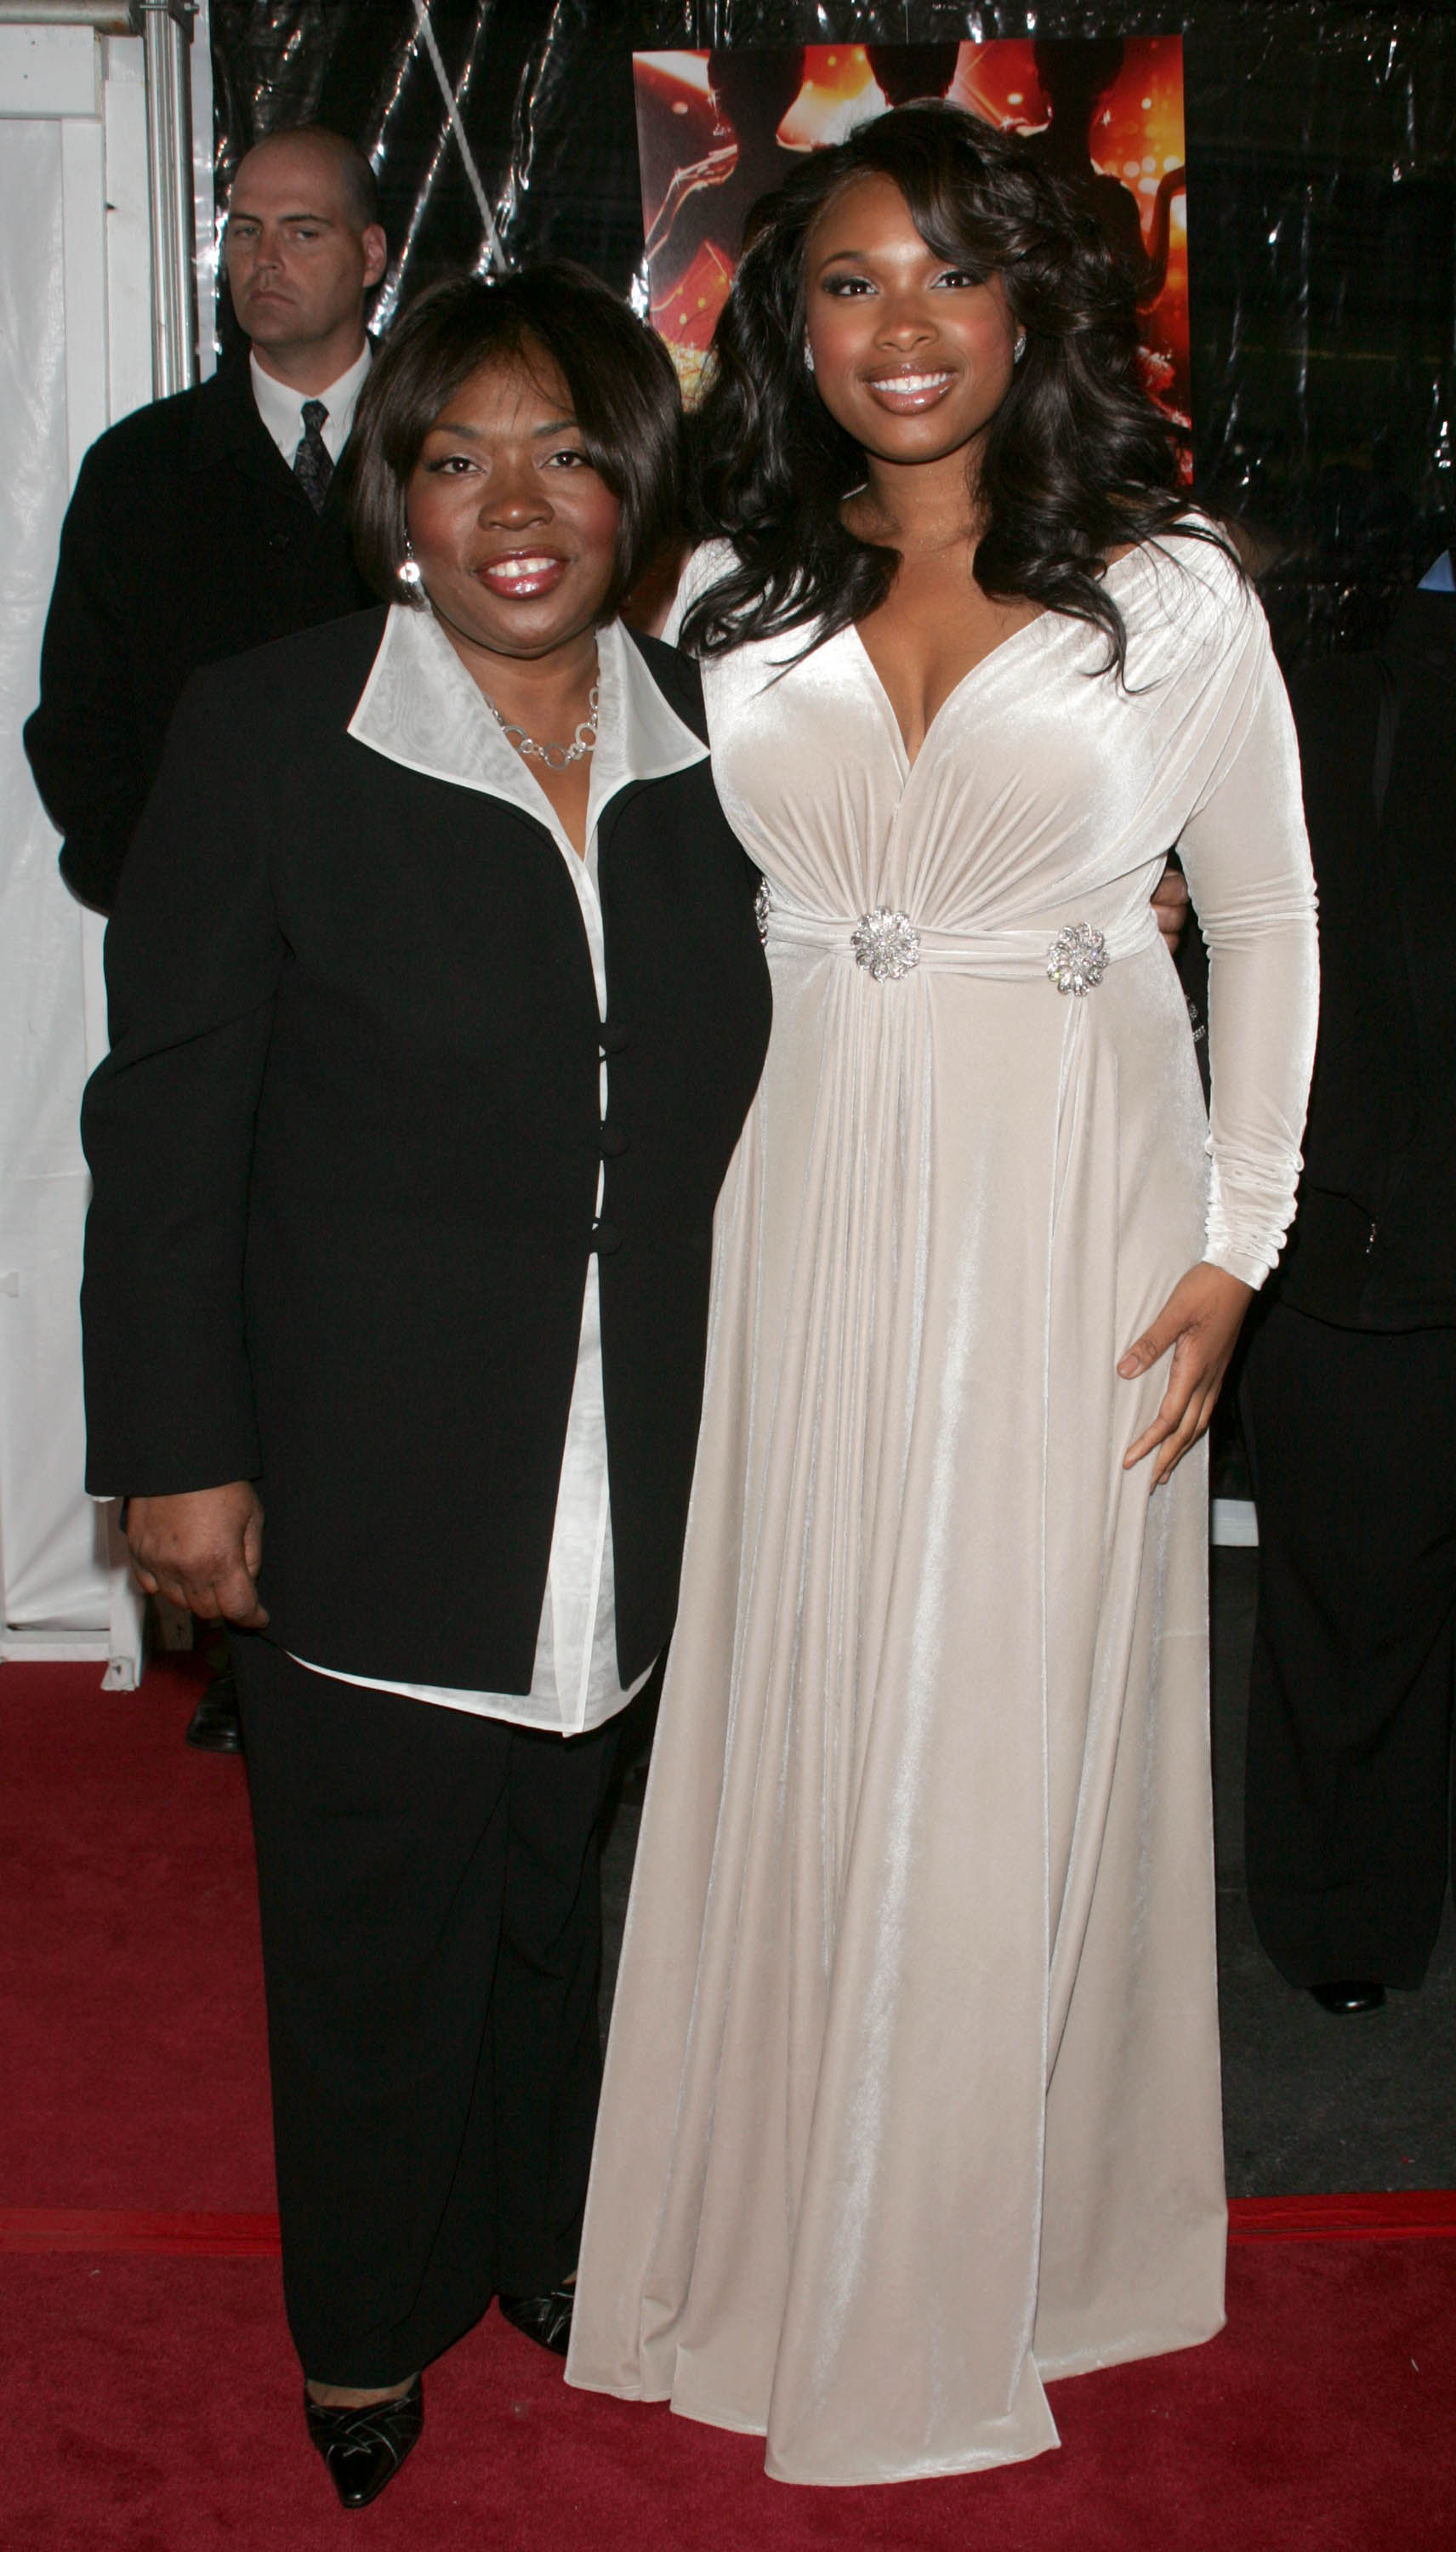 Jennifer Hudson at an event with her mother at the Ziegfeld Theater in New York City. Source: Getty Images